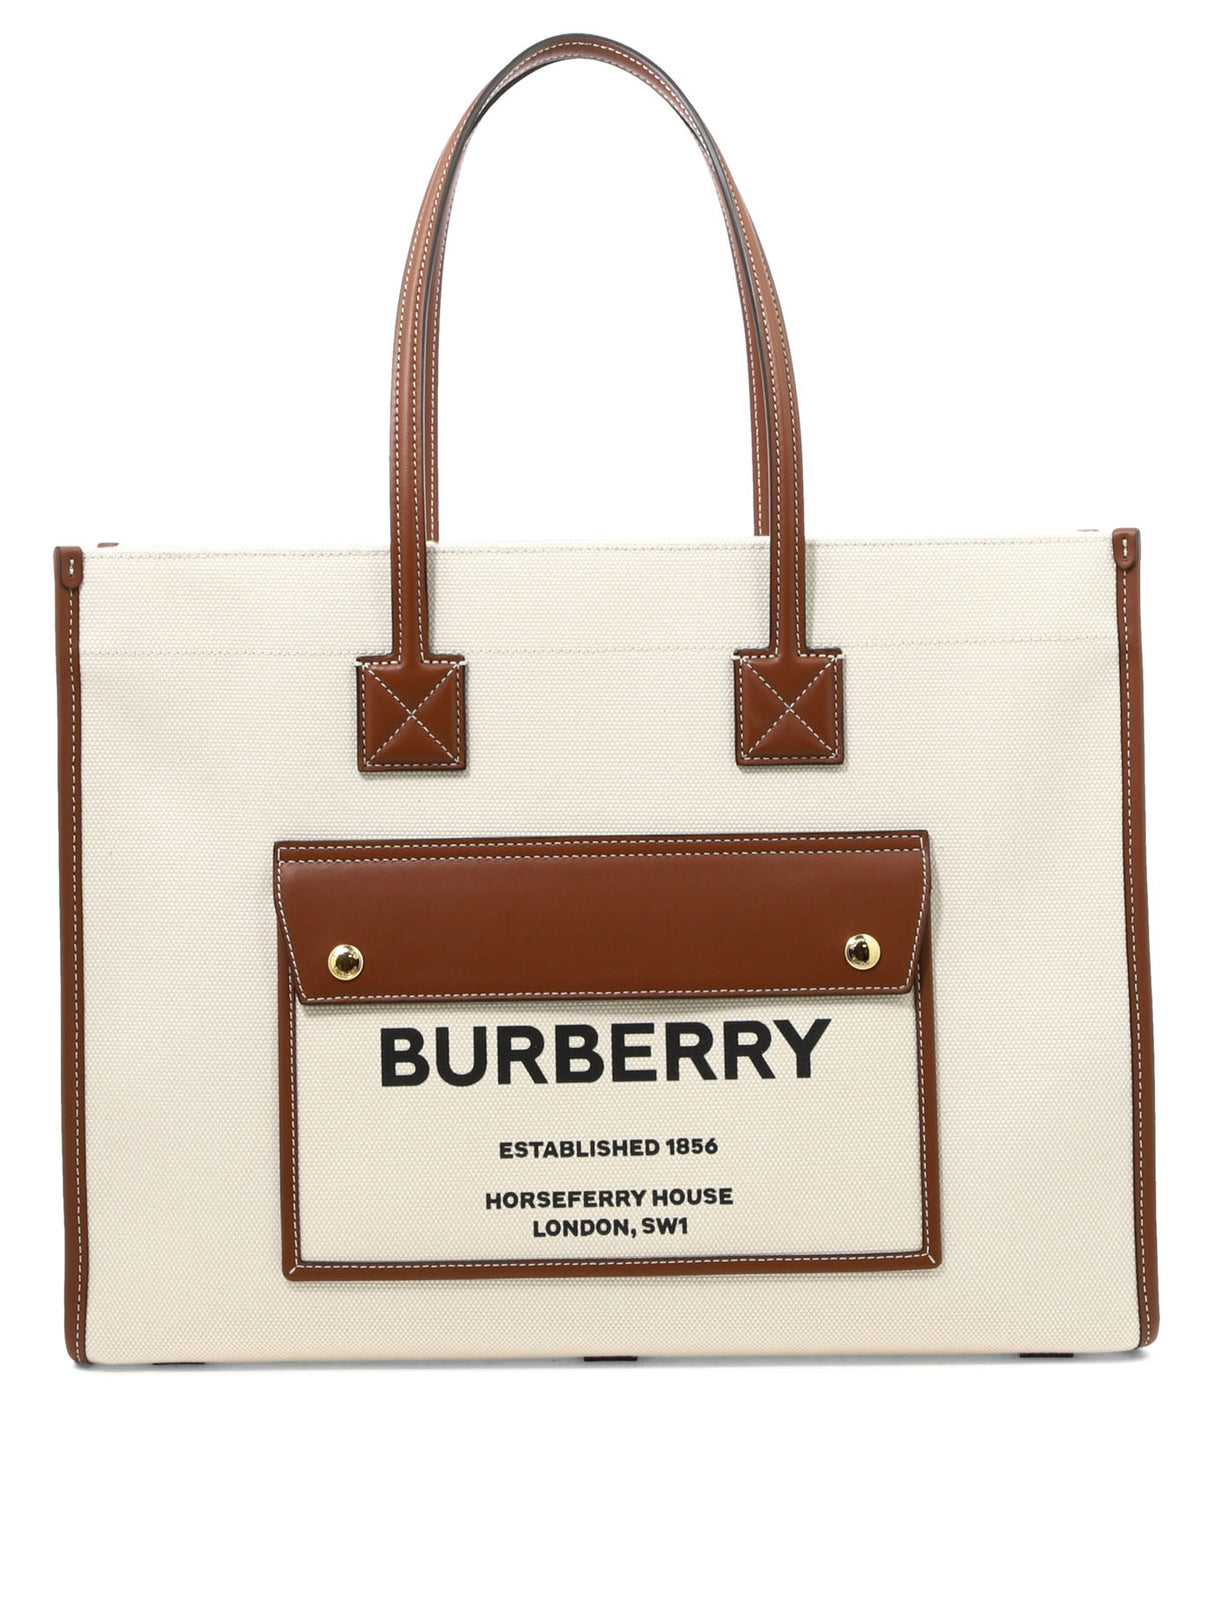 BURBERRY Tan Leather "Medium Freya" Tote with Horsefairy Print and Polished Metal Details